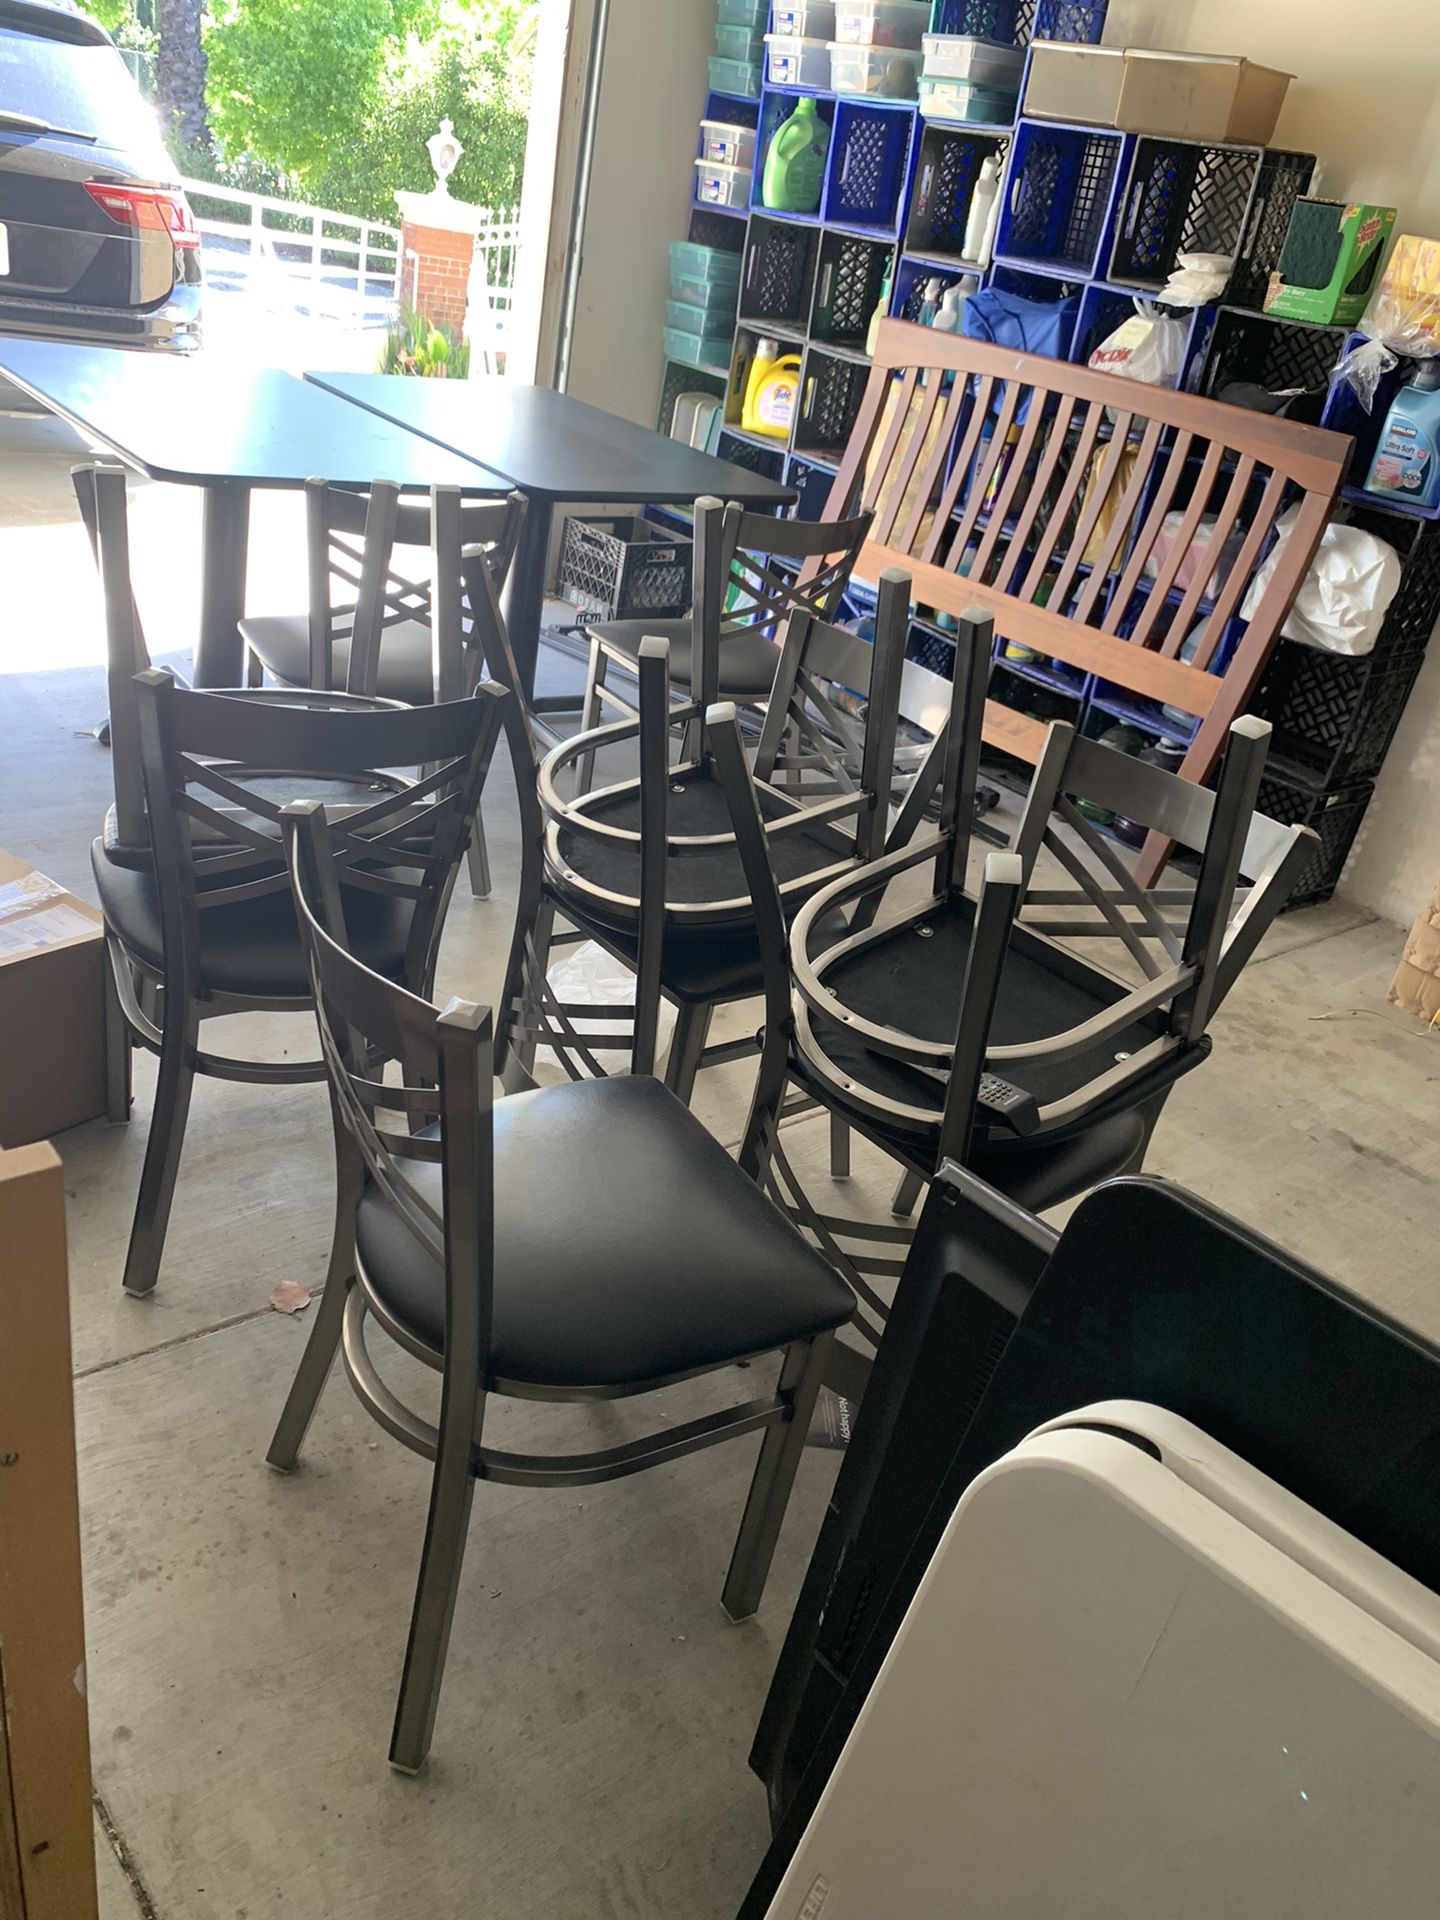 New Modern Tables & Chairs for Sale!